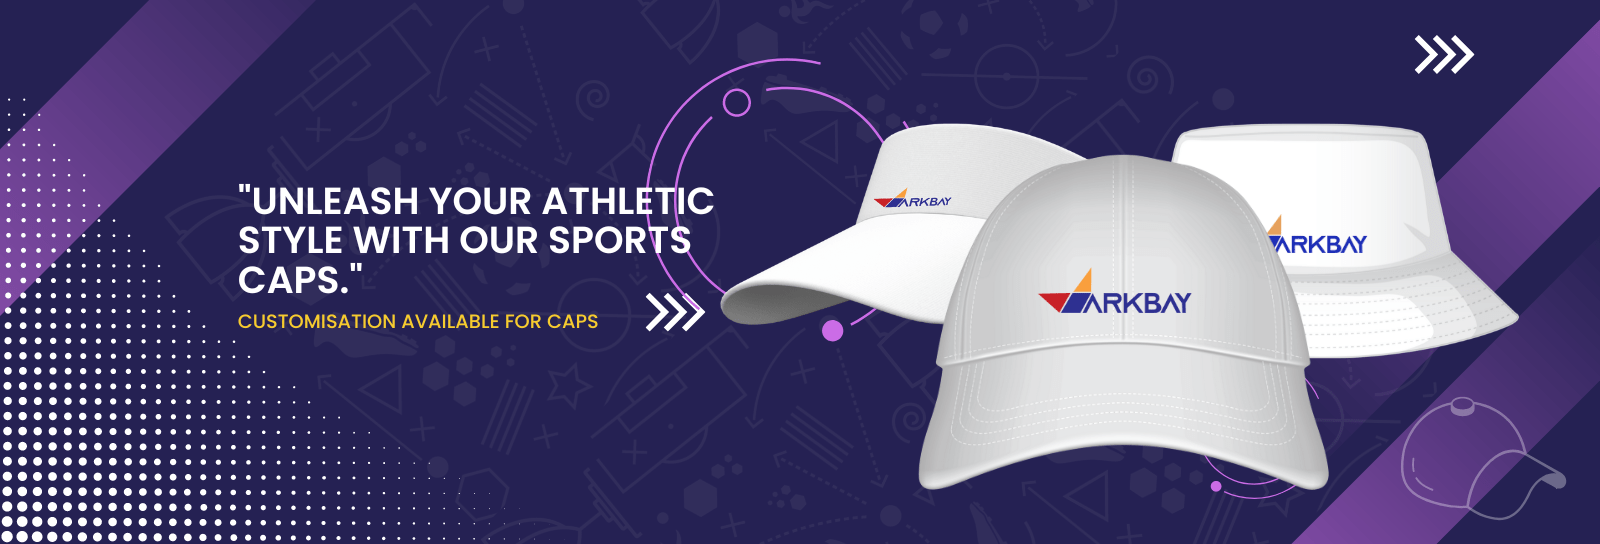 UNLEASH YOUR ATHLETIC STYLE WITH OUR SPORTS AUSTRALIA